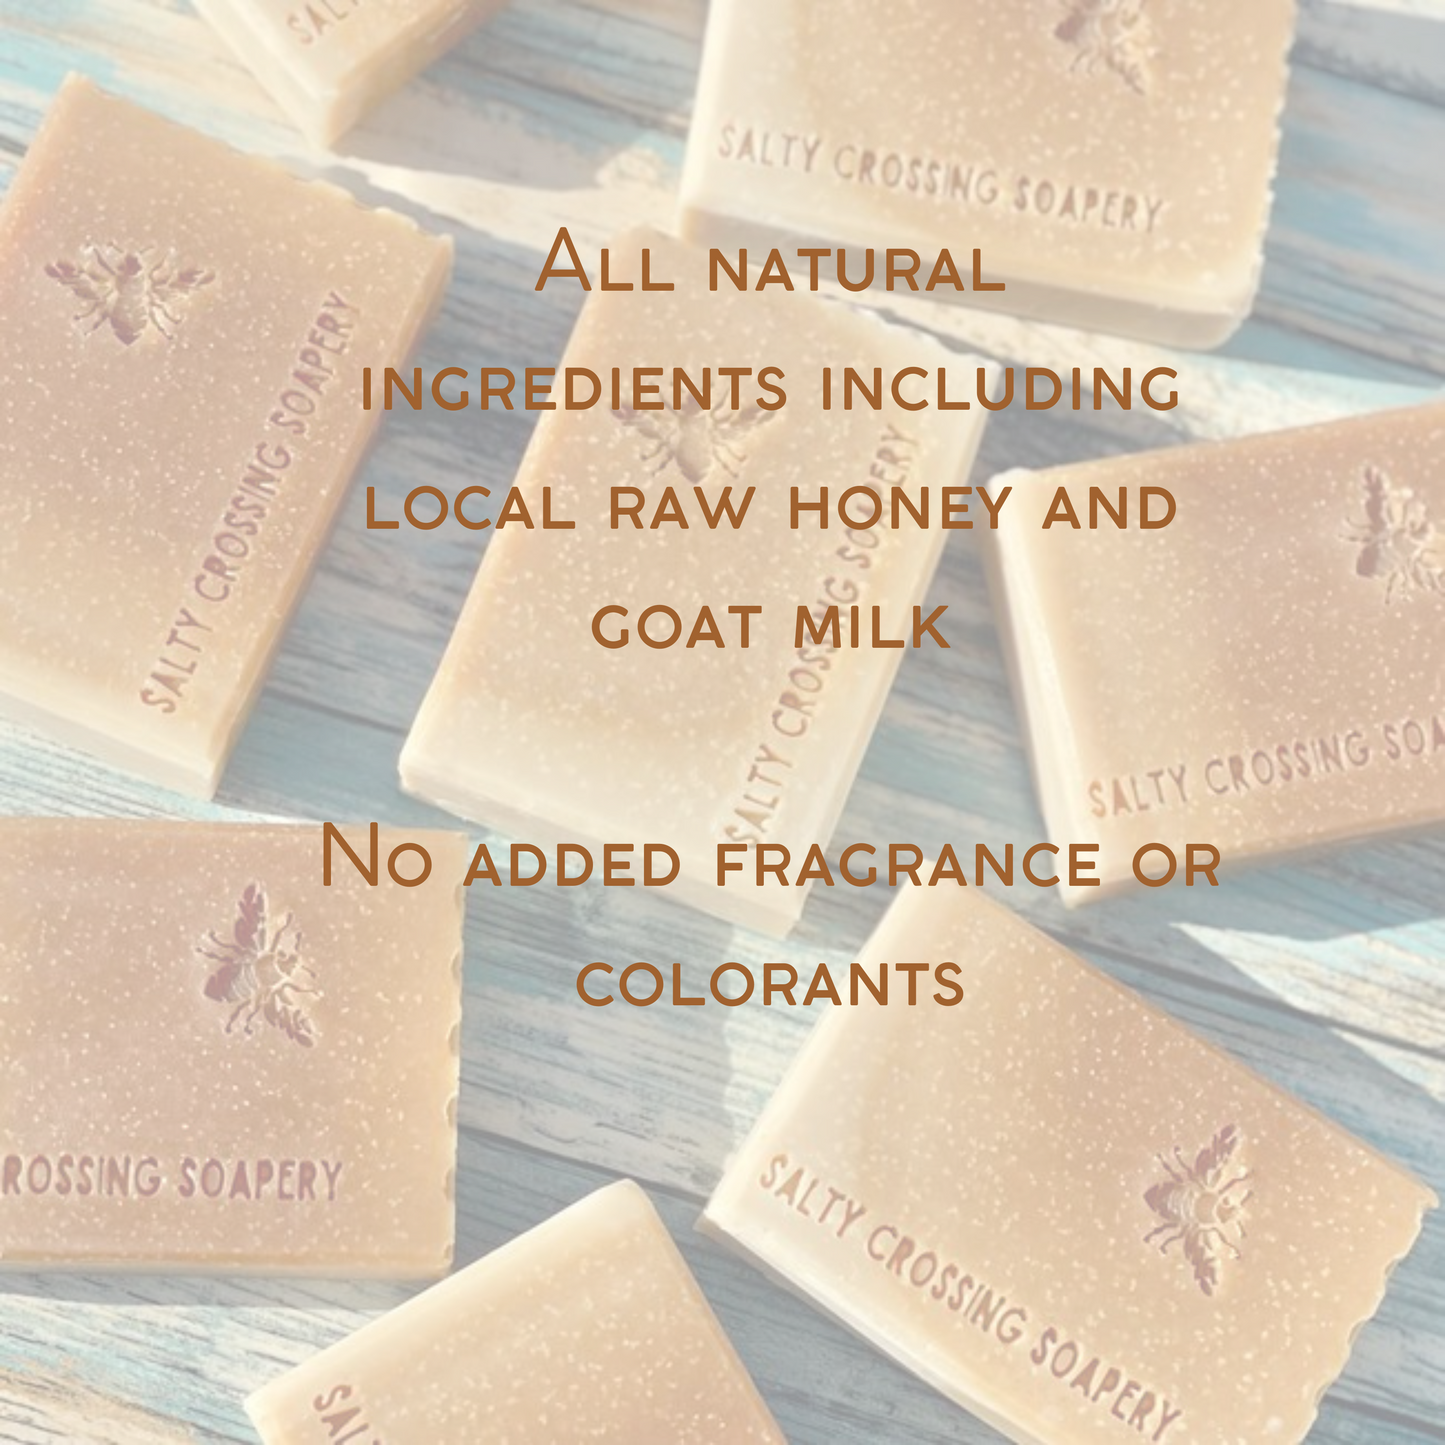 graphic. all natural ingredients including local raw honey and goat milk. no added fragrance or colorants.